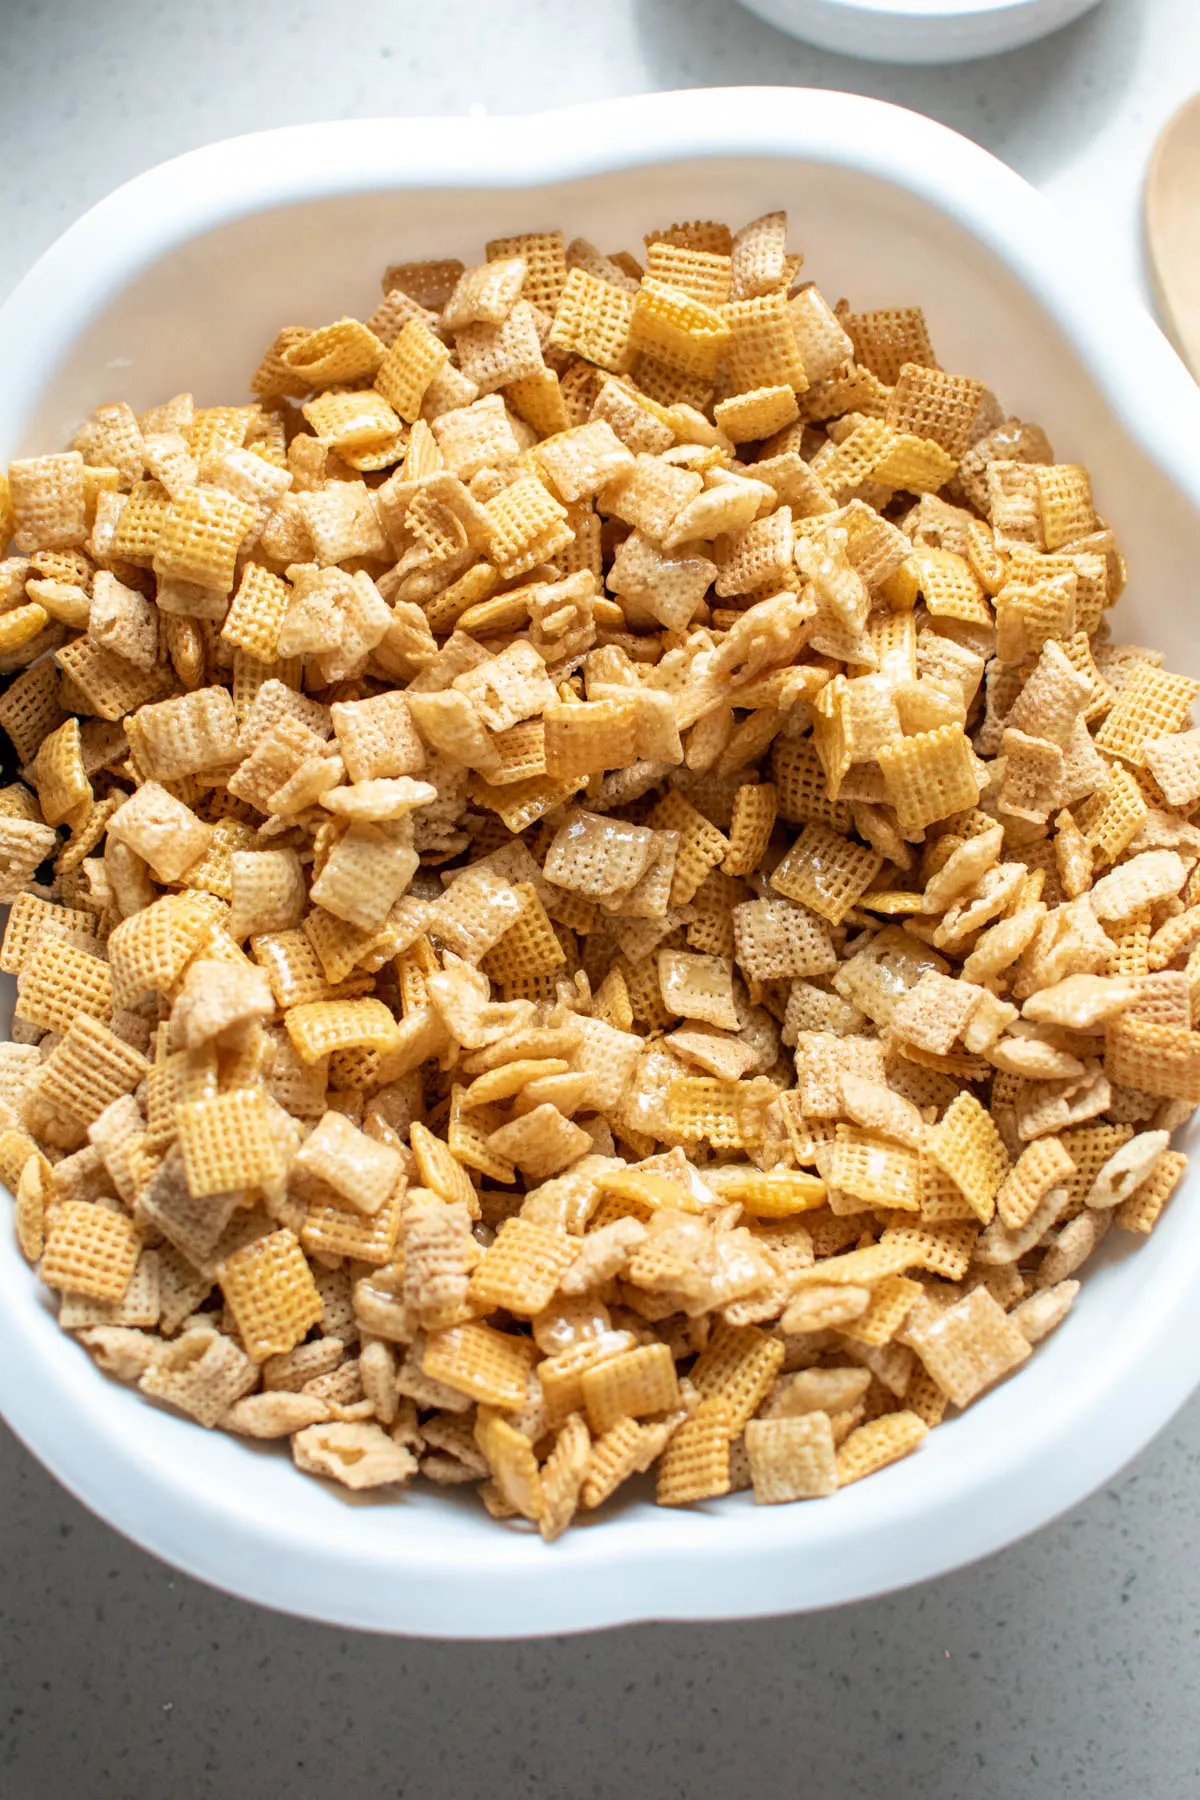 Large white bowl with Chex mix covered in sugar syrup on countertop.